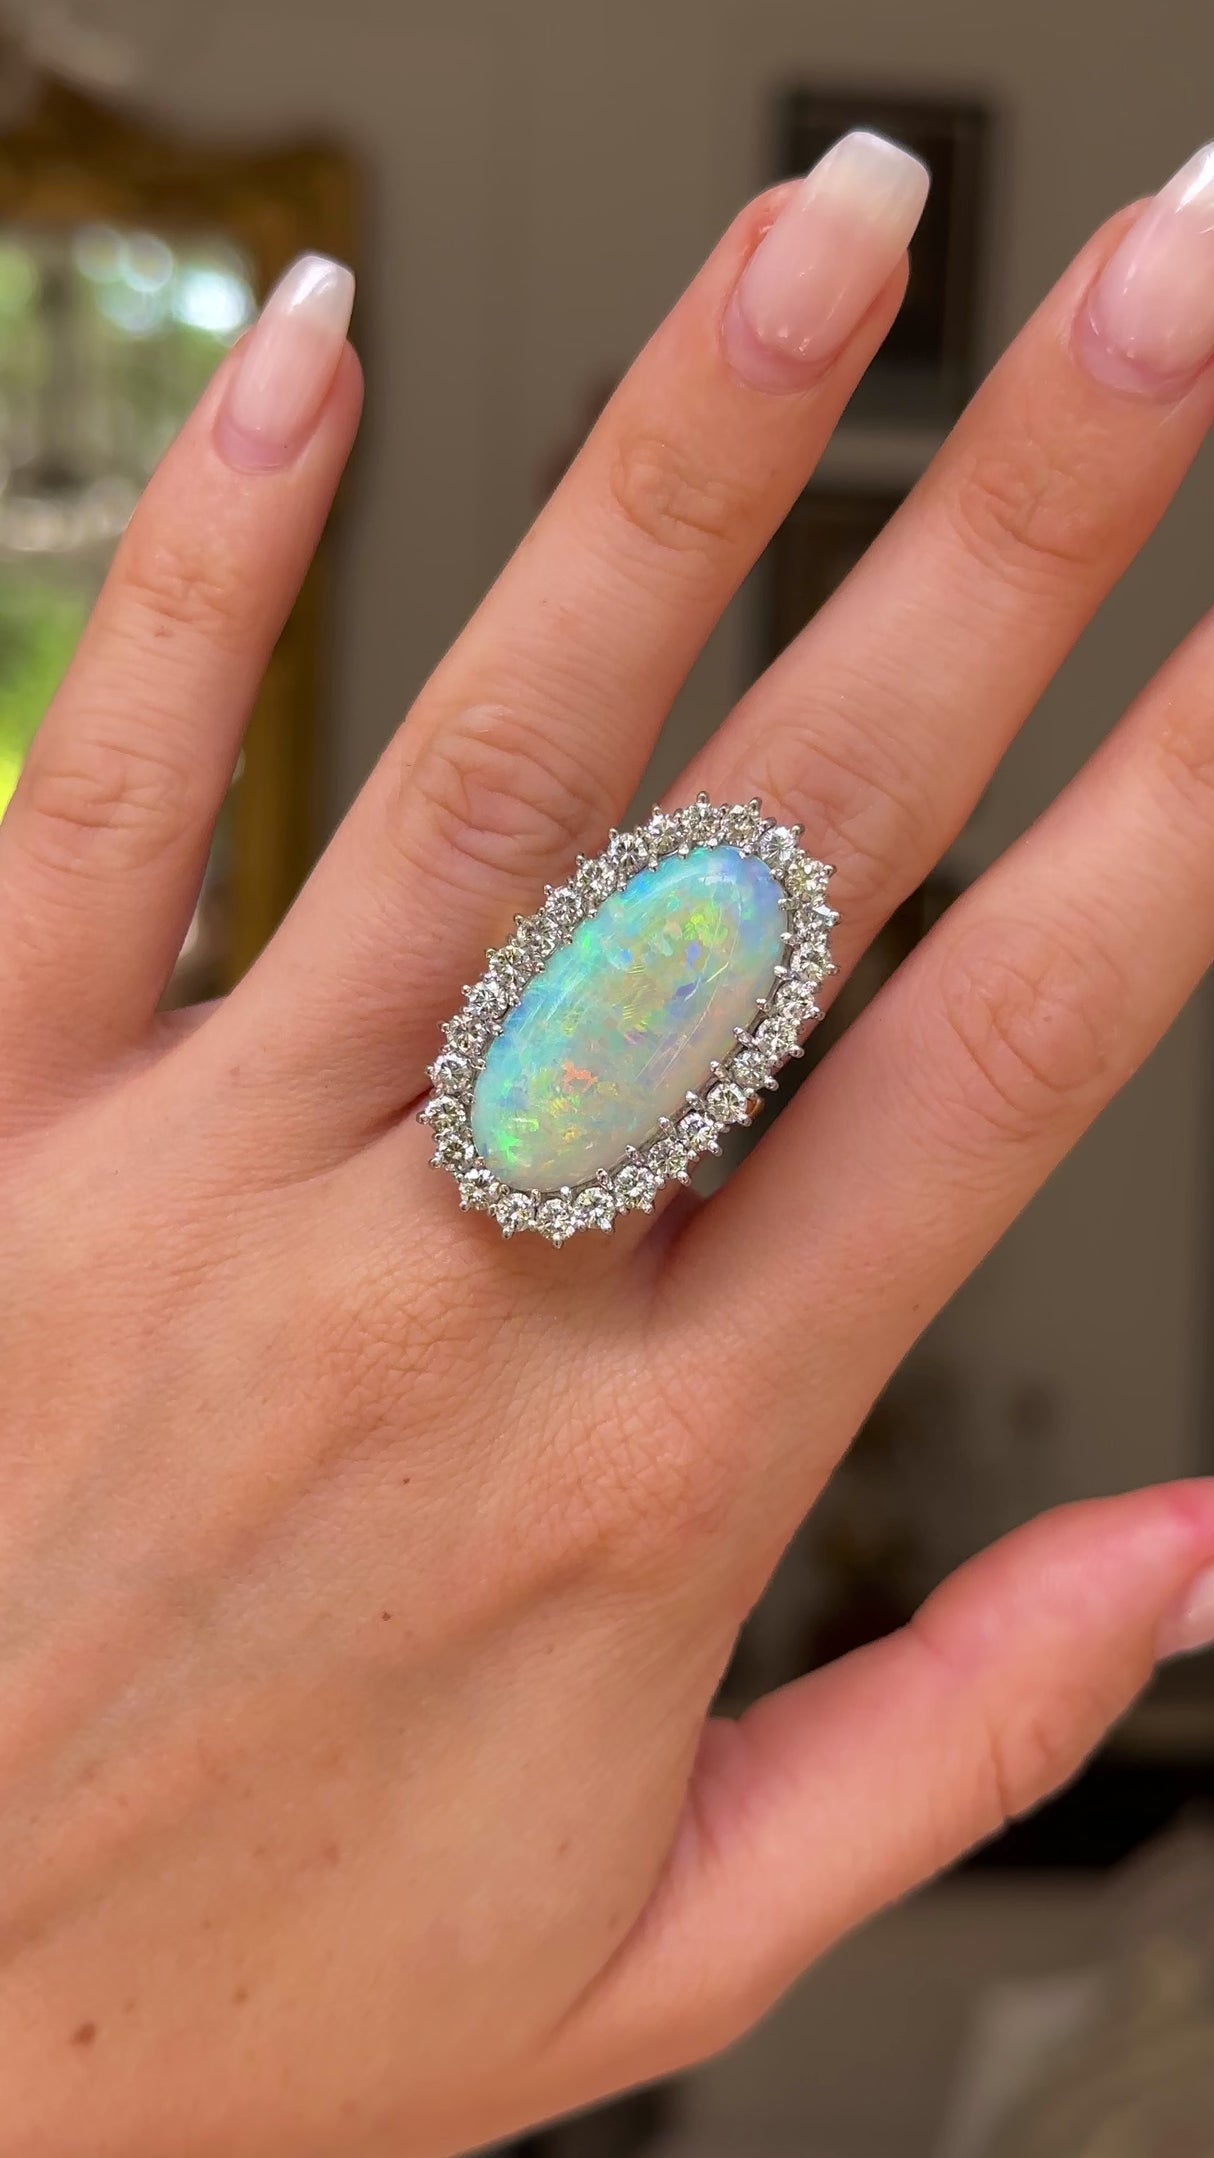 Vintage, 1980s large Australian opal & diamond cluster ring, 18ct yellow gold